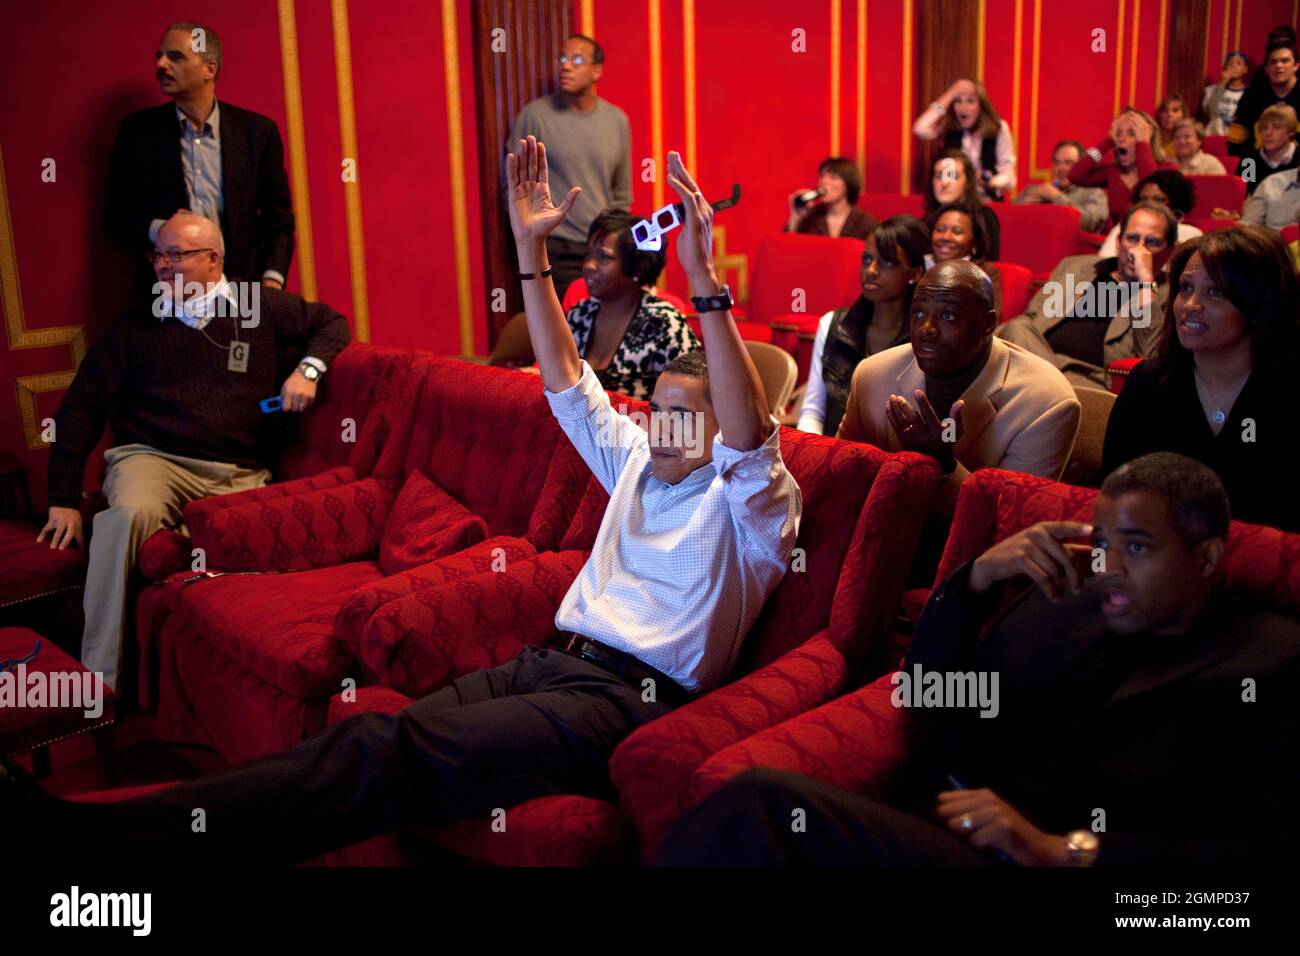 President Barack Obama holds 3-D glasses while watching the Super Bowl game at a Super Bowl Party in the family theater of the White House. Guests included family, friends, staff members and bipartisan members of Congress, 2/1/09. Official White House Photo by Pete Souza Stock Photo